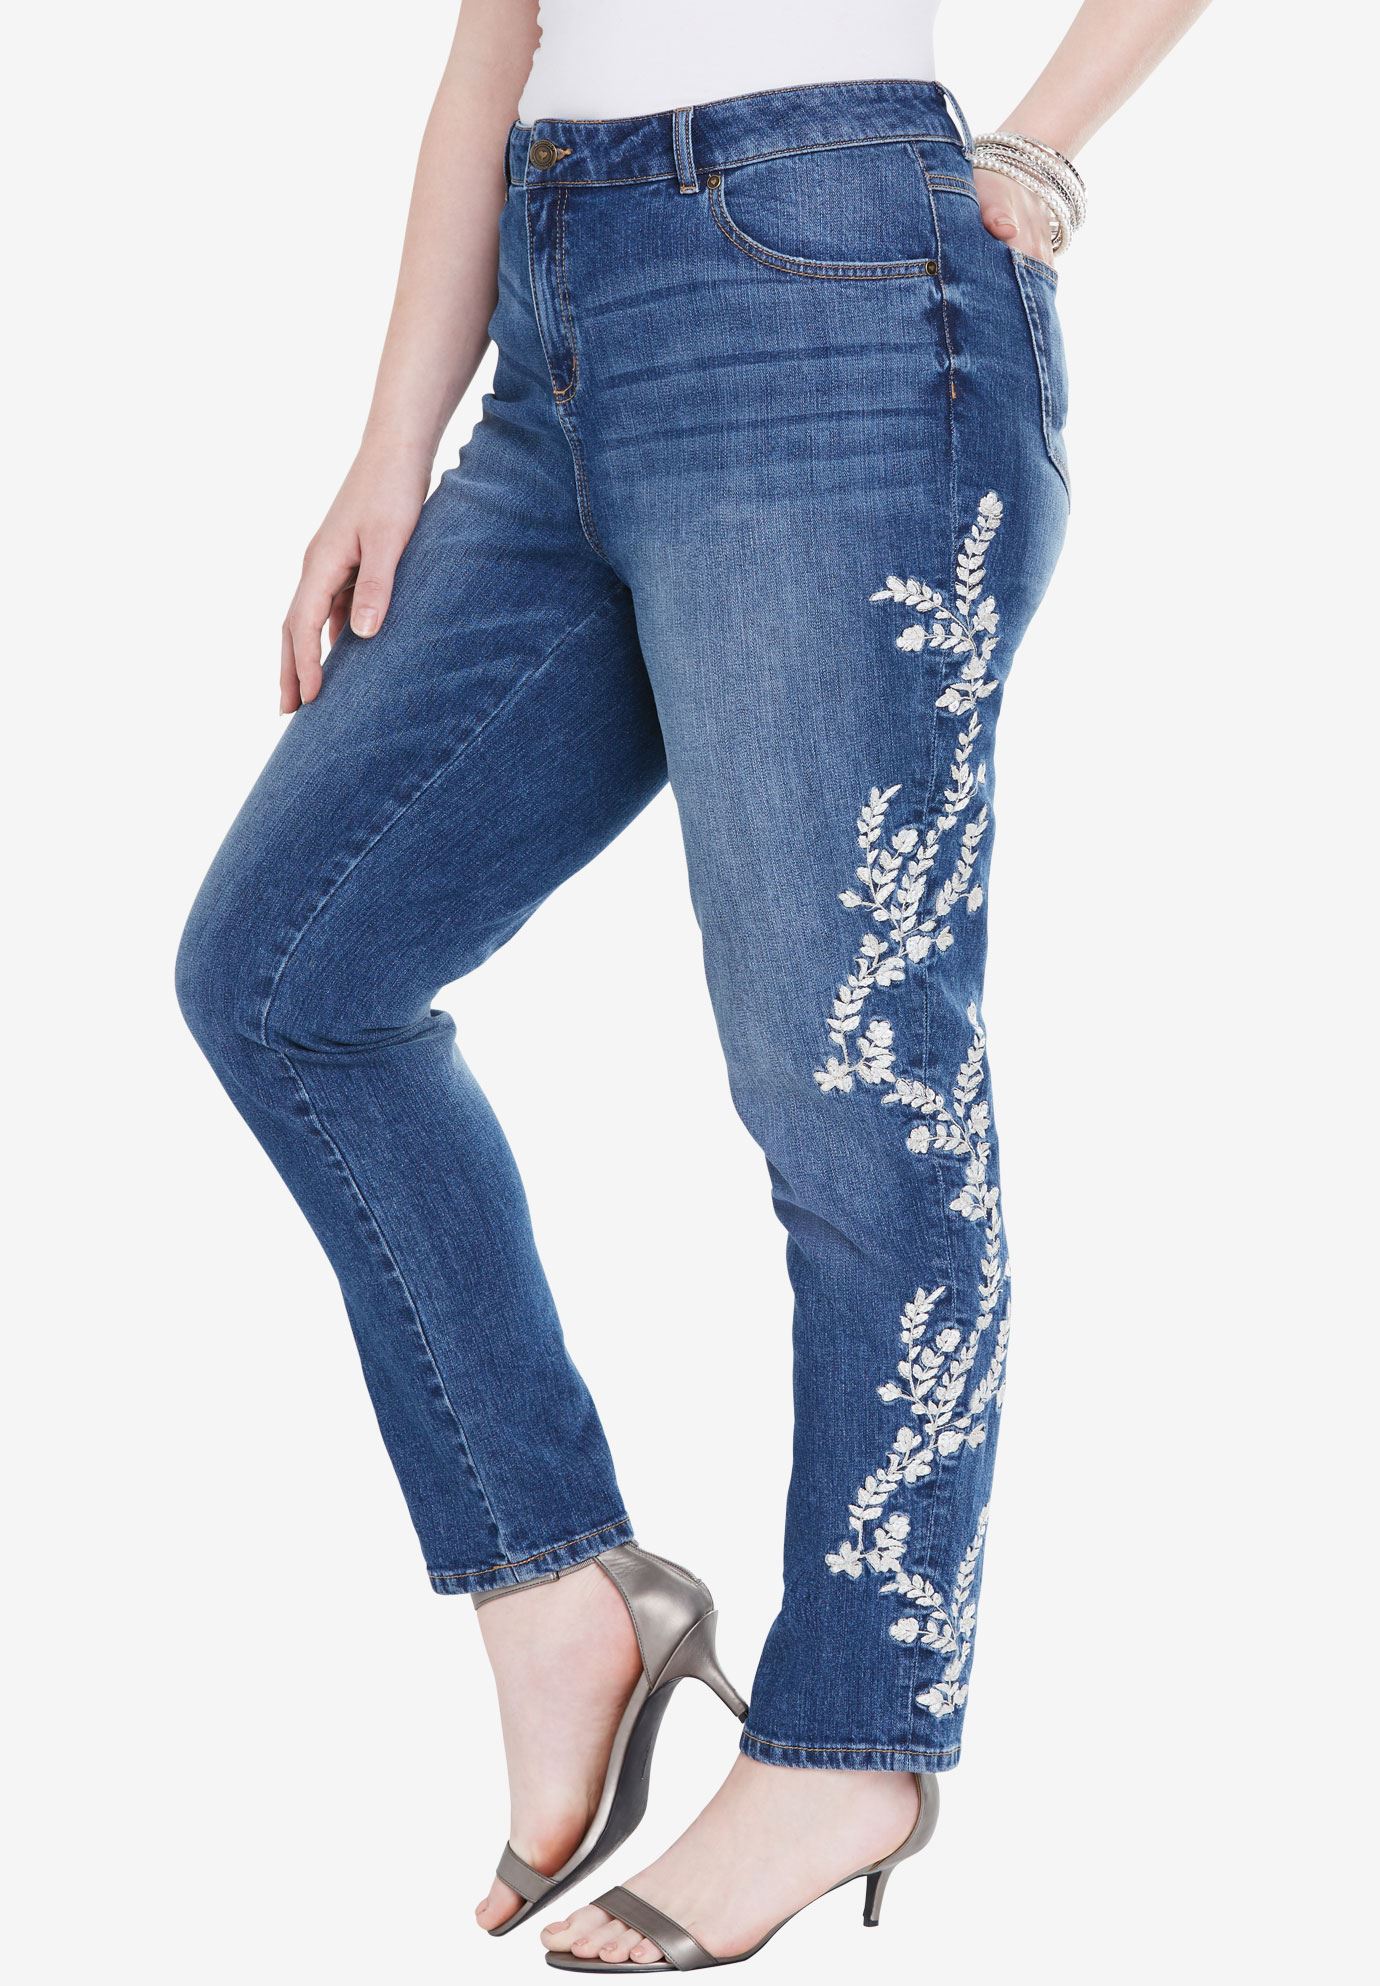 Floral Embroidered Girlfriend Jean by Denim 24/7®| Plus Size Jeans ...